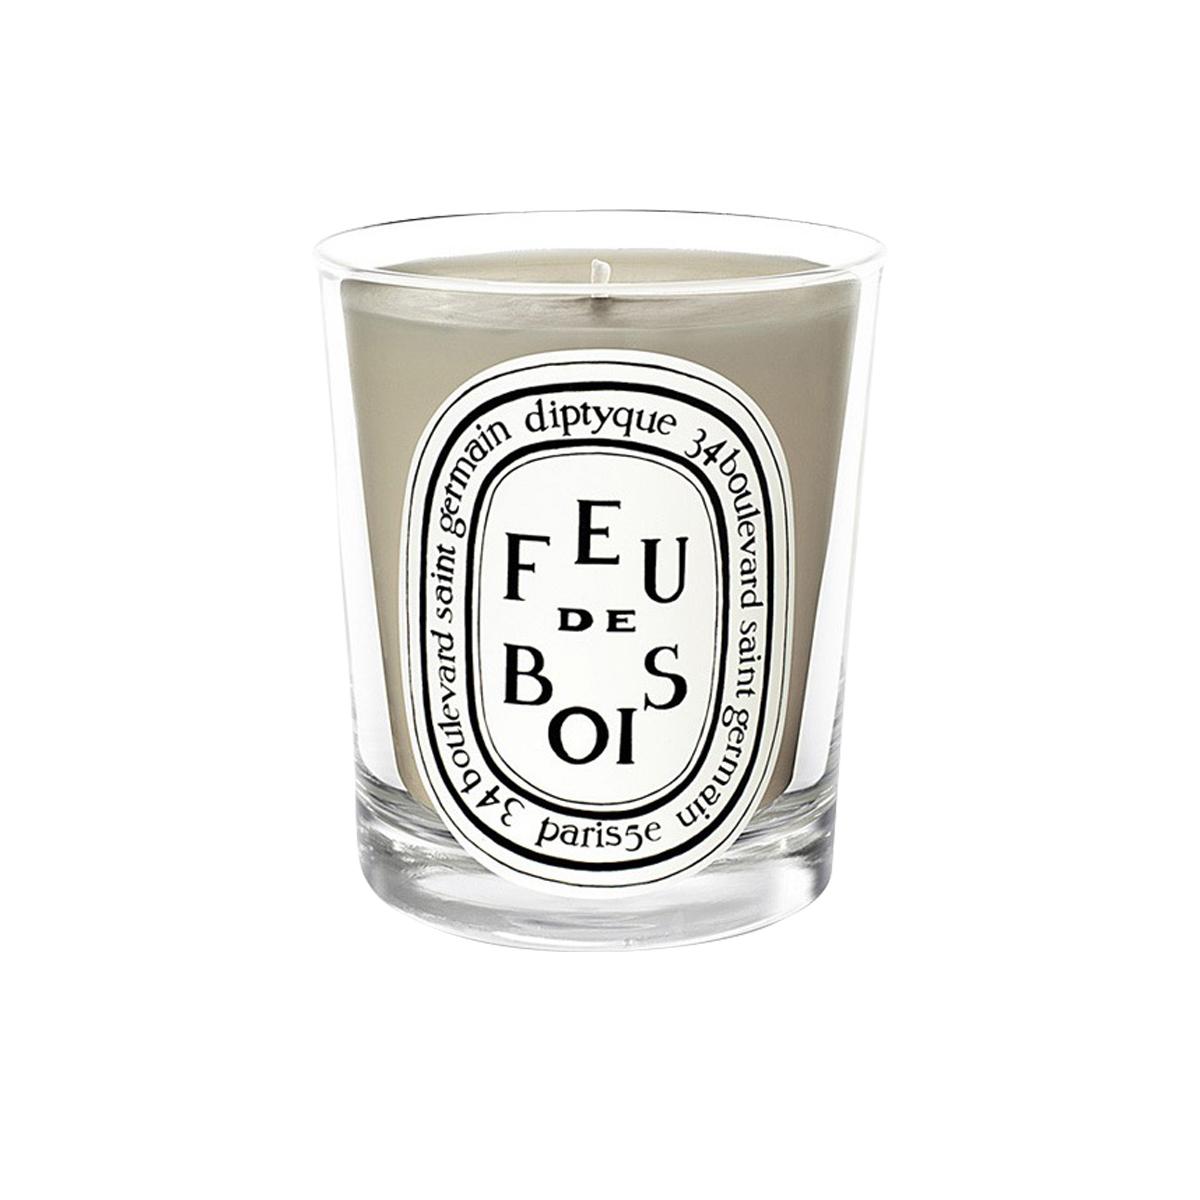 Primary image of Feu de Bois (Firewood) Candle